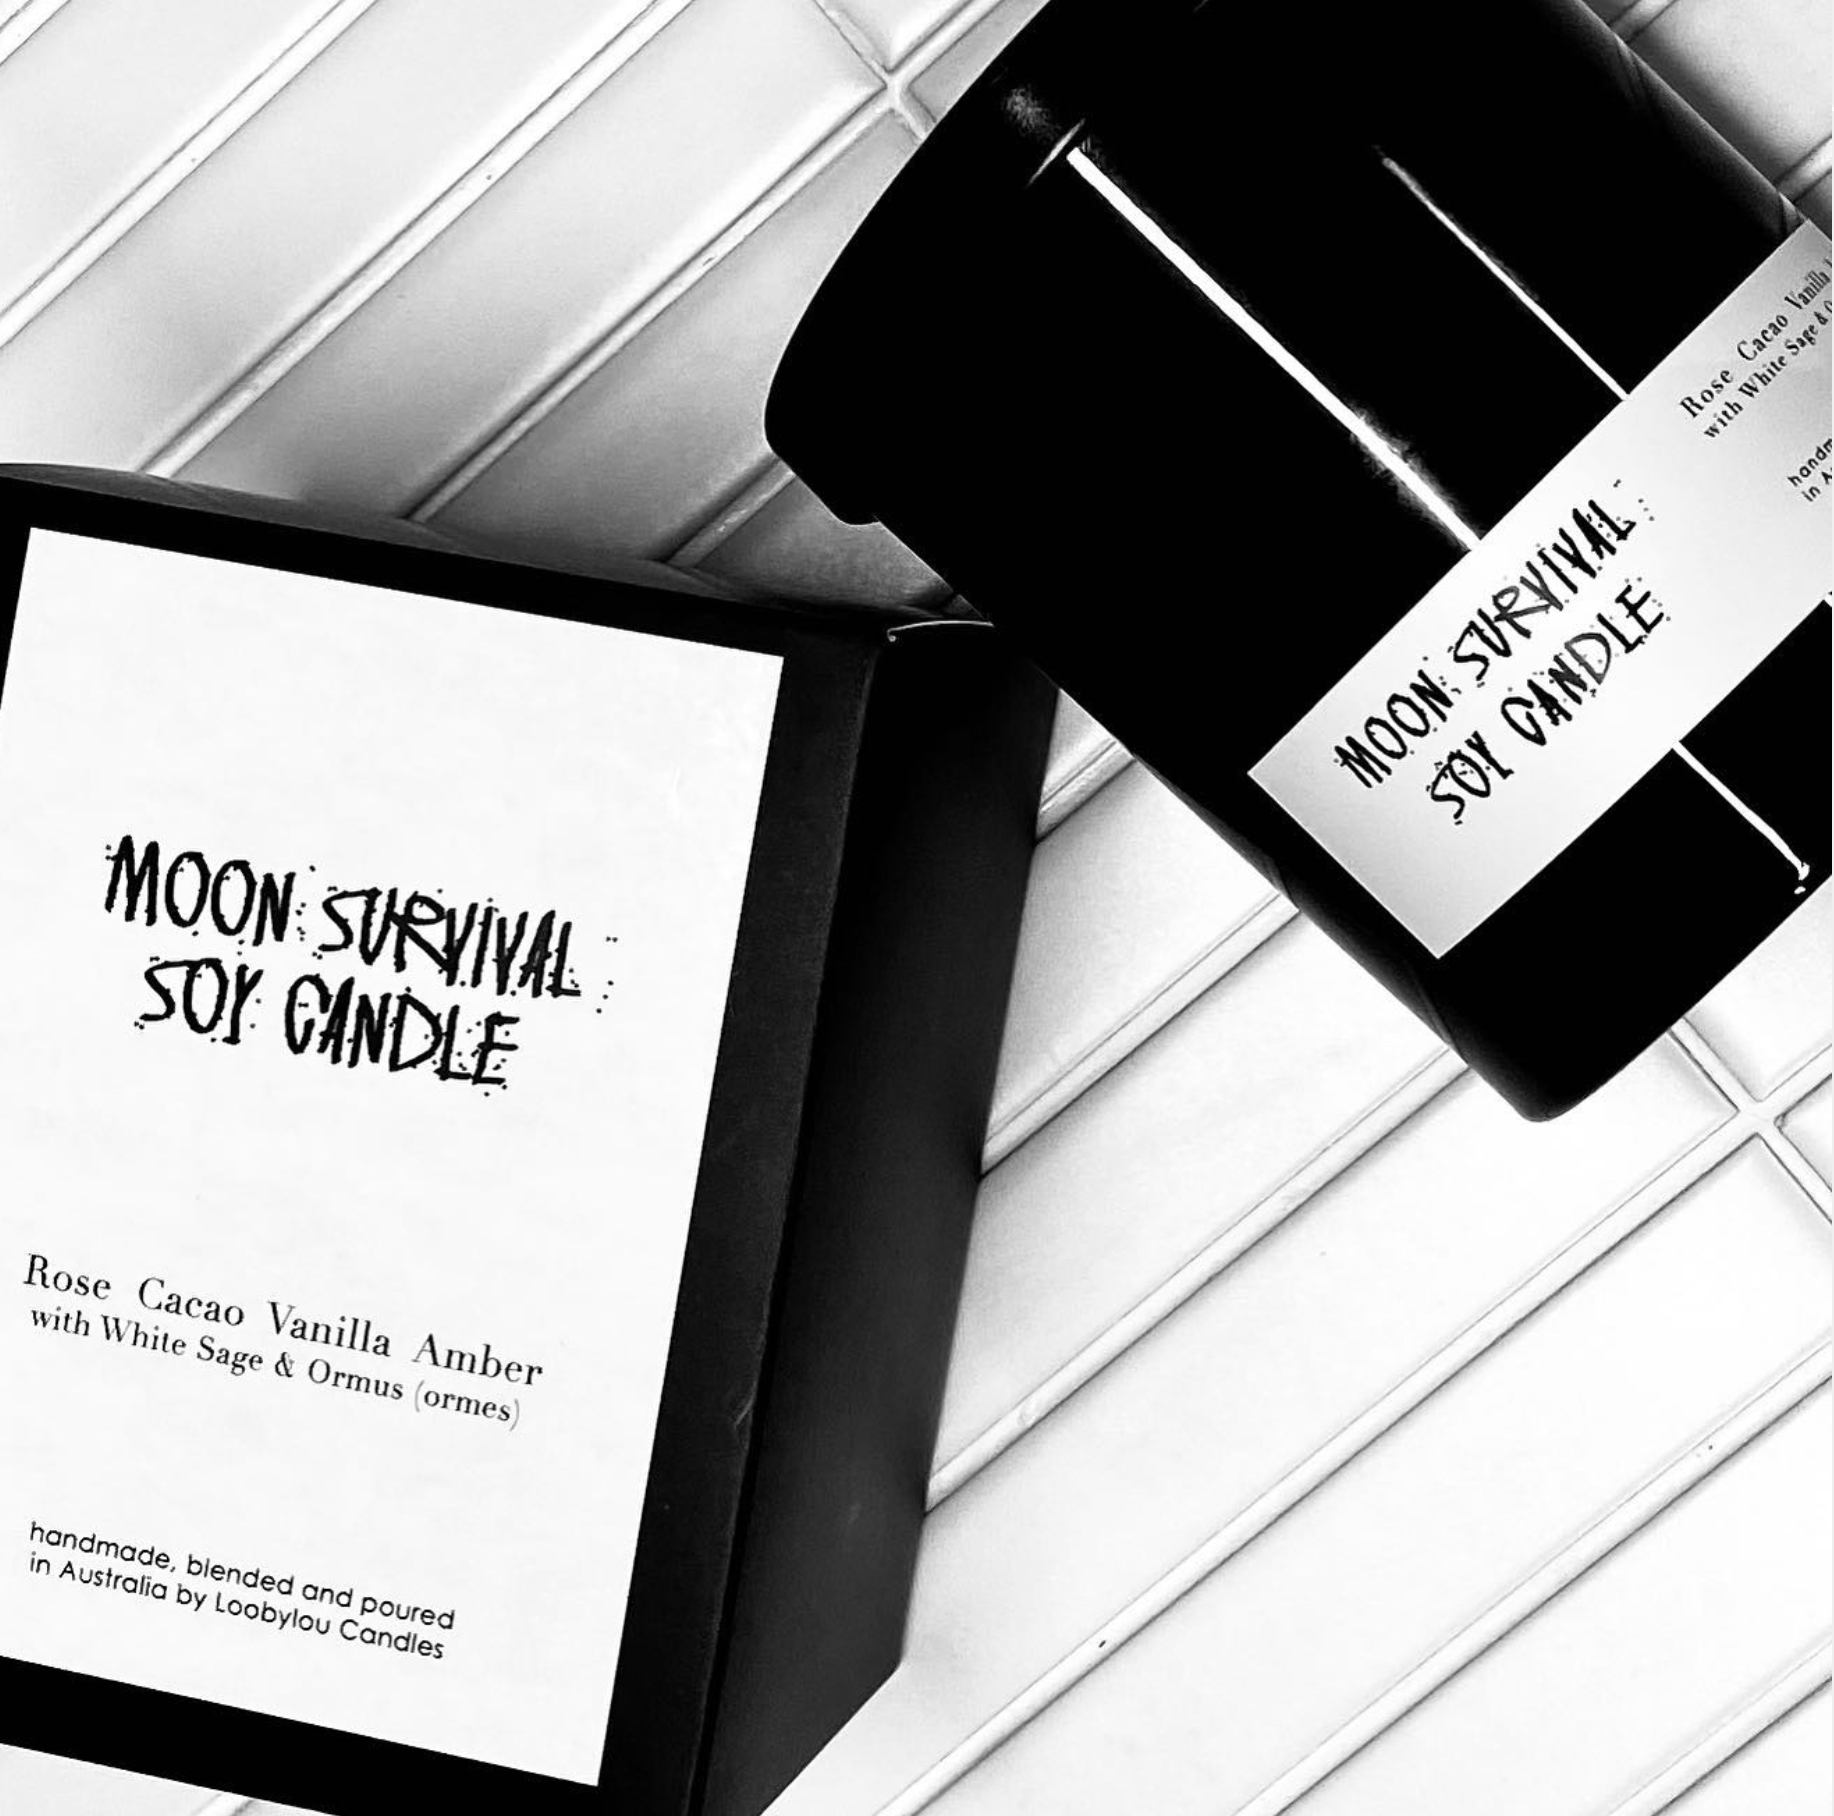 Moon Survival Candle